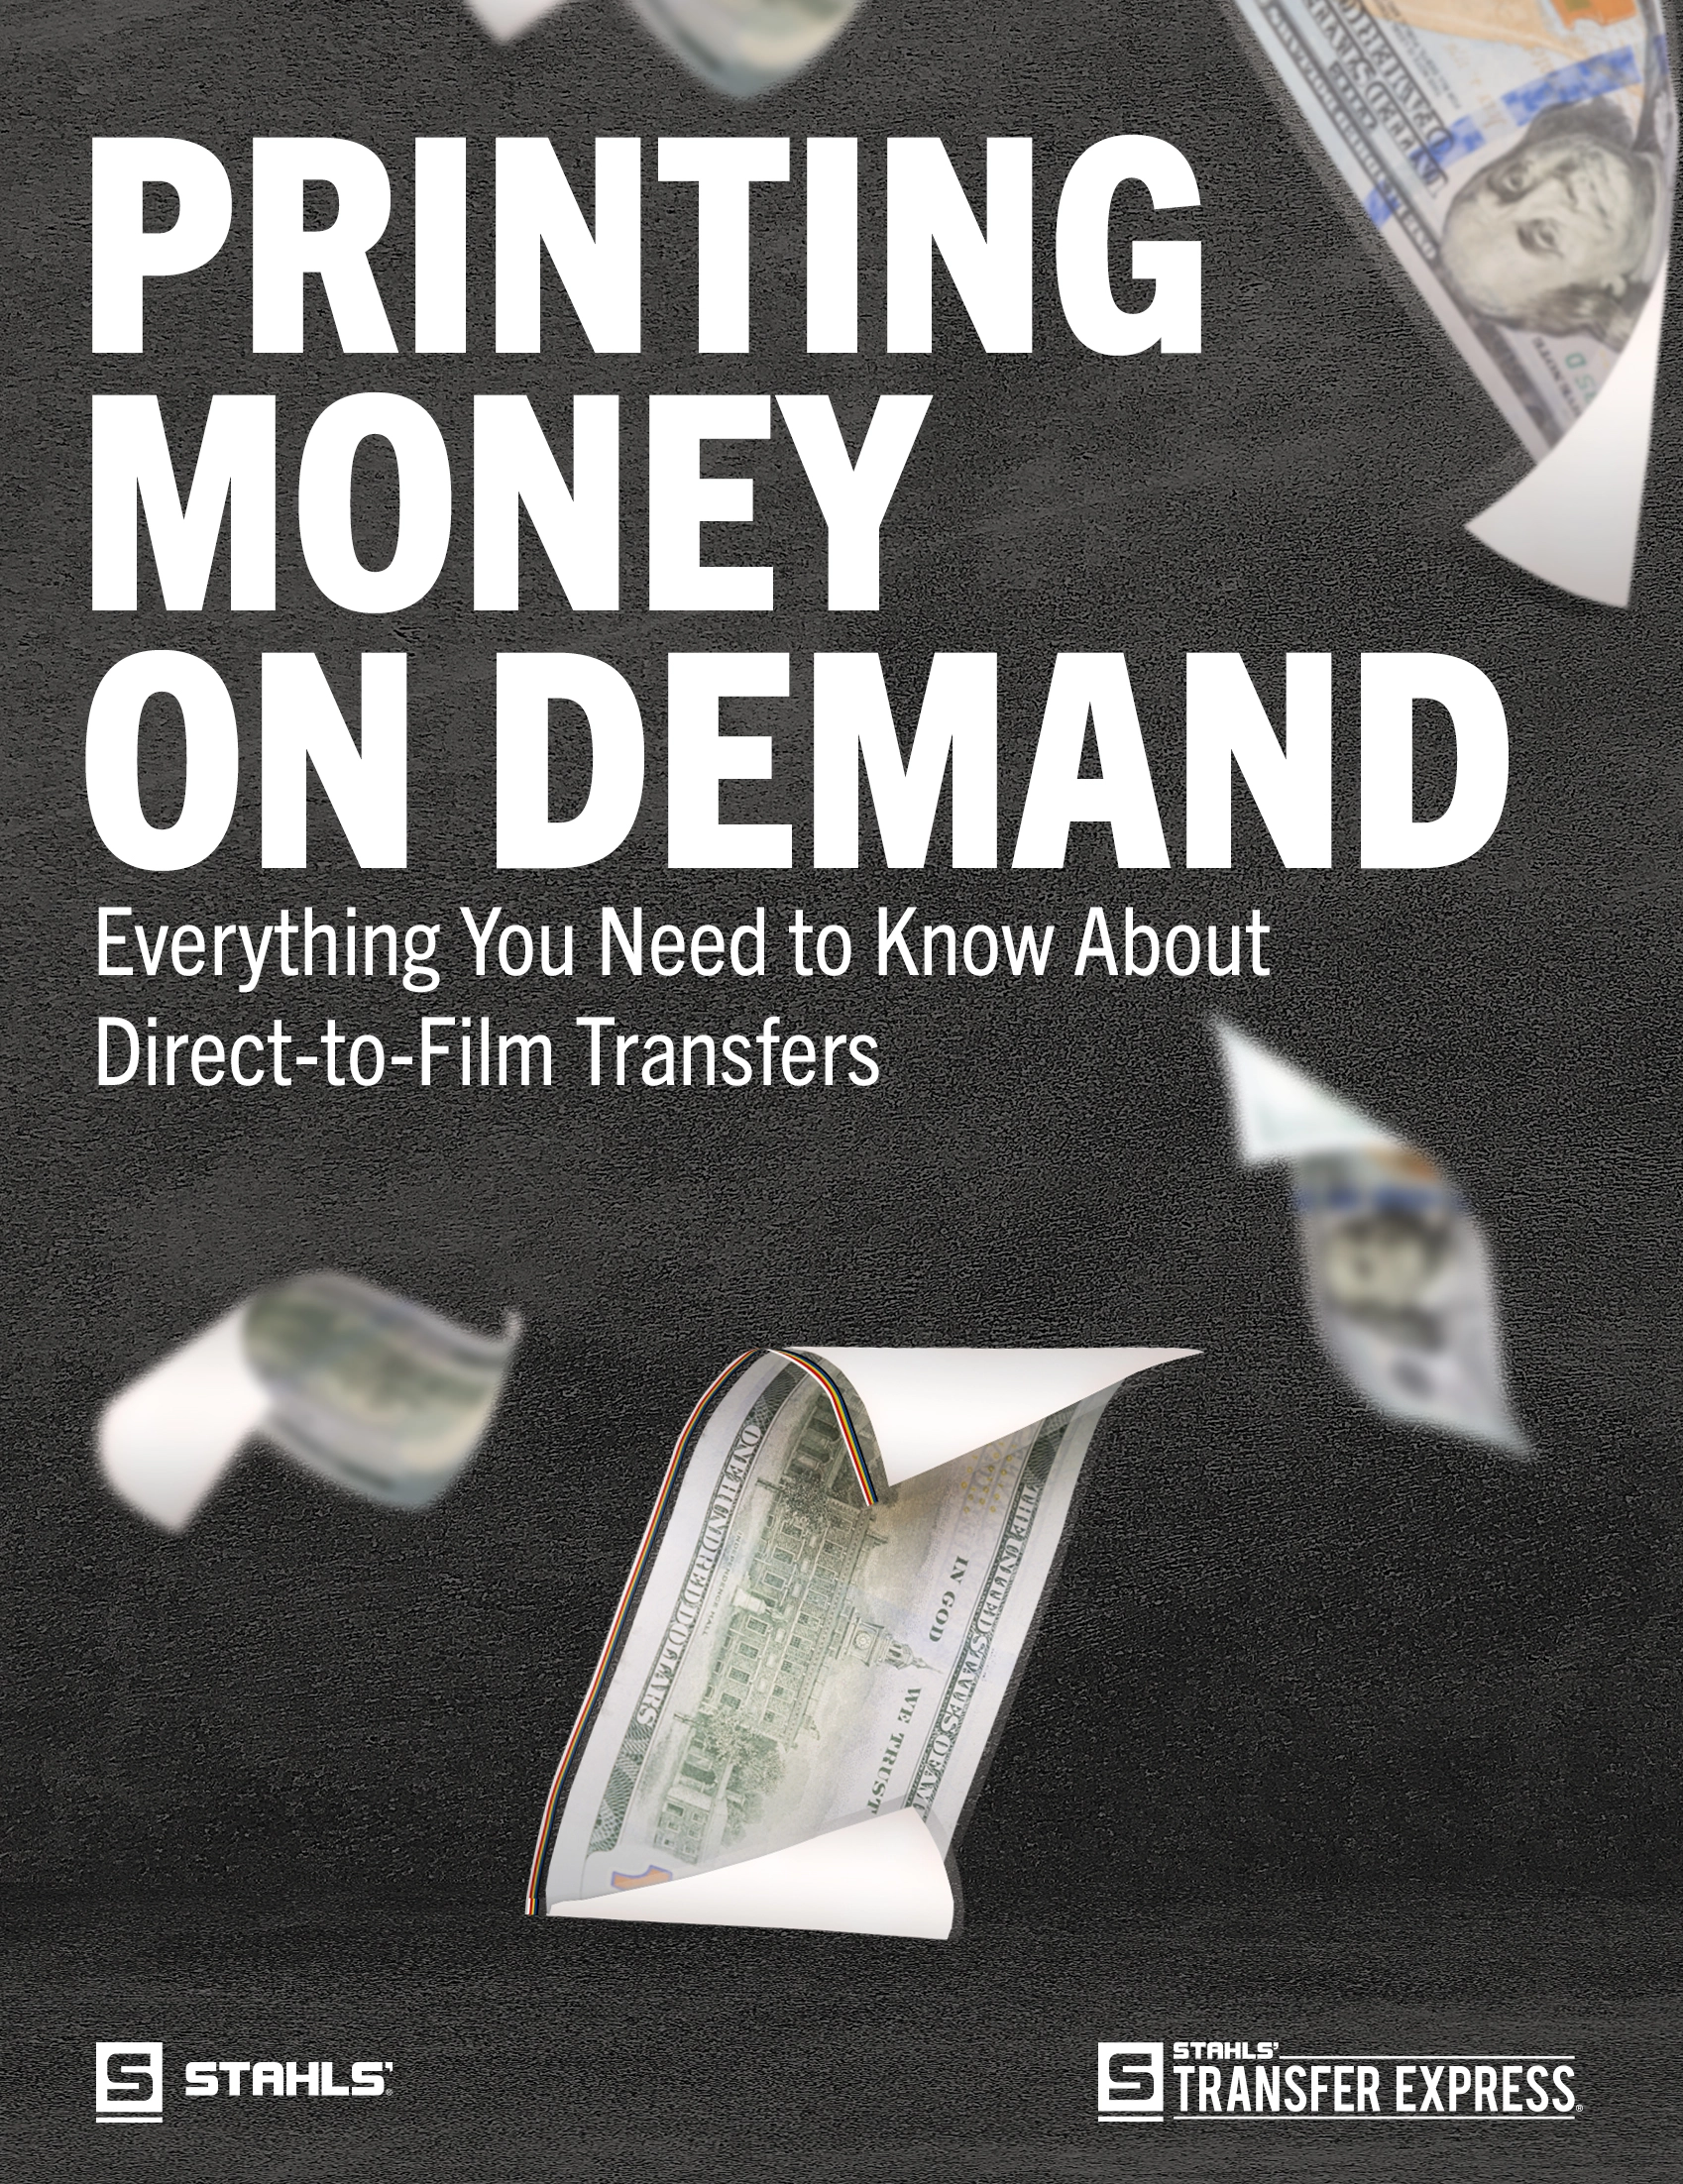 Download Our Free E-Book: Printing Money On Demand